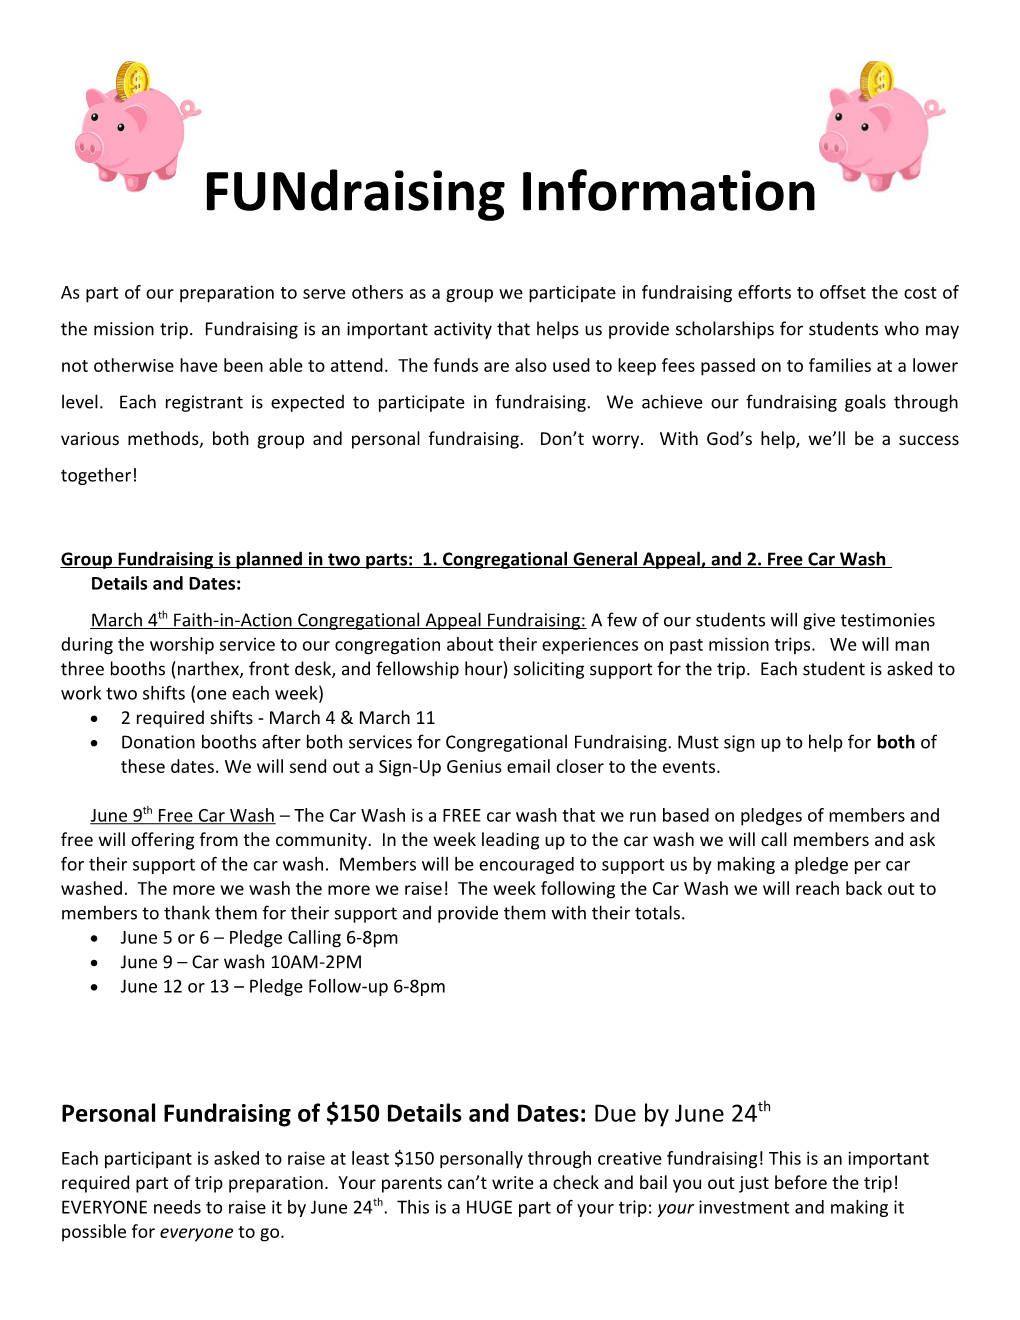 Group Fundraising Is Planned in Two Parts: 1. Congregational General Appeal, and 2. Free